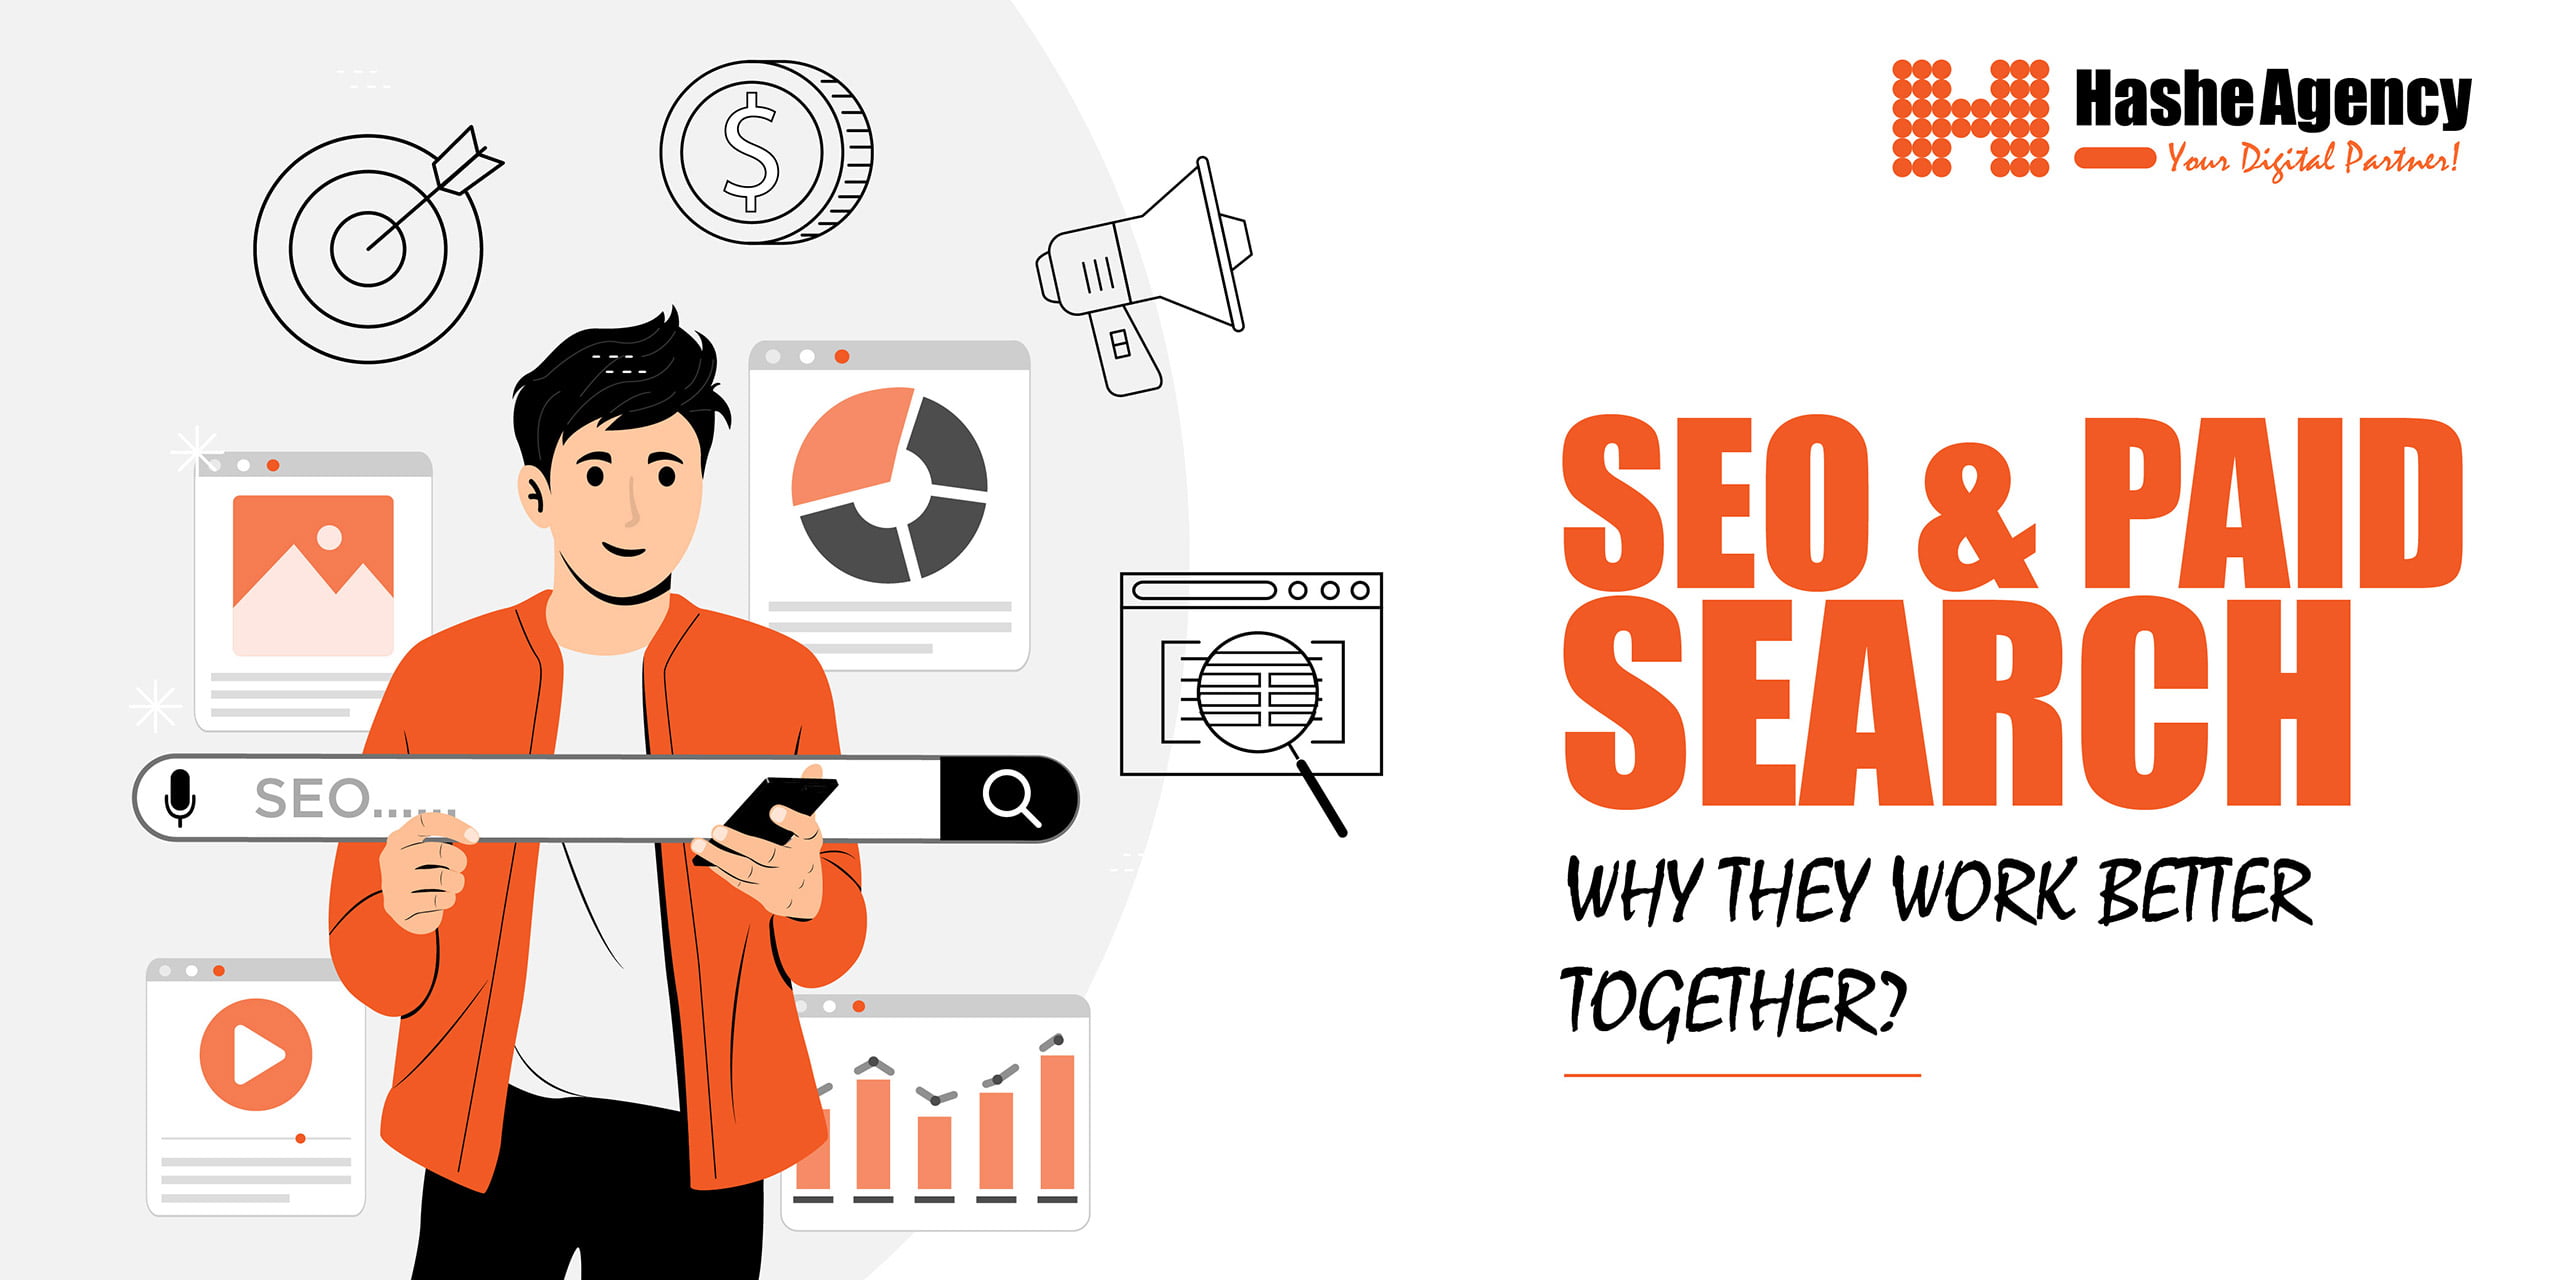 SEO & Paid Search